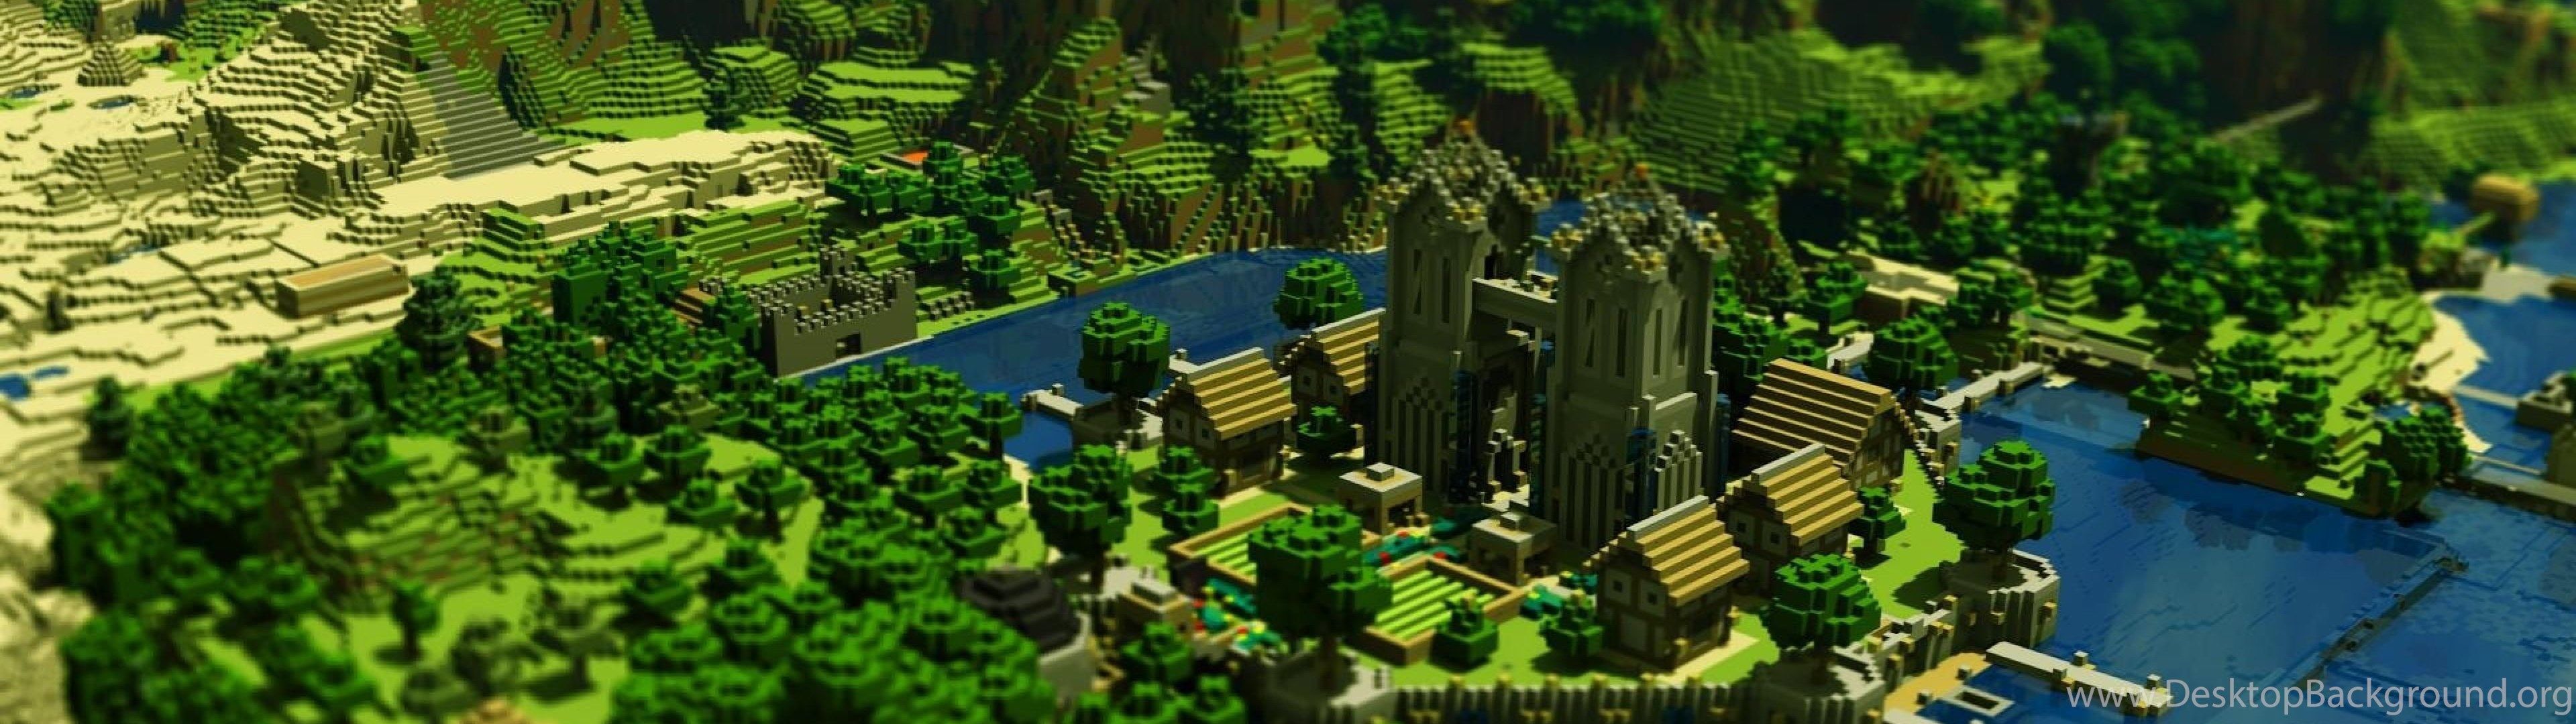 minecraft dual screen Wallpapers